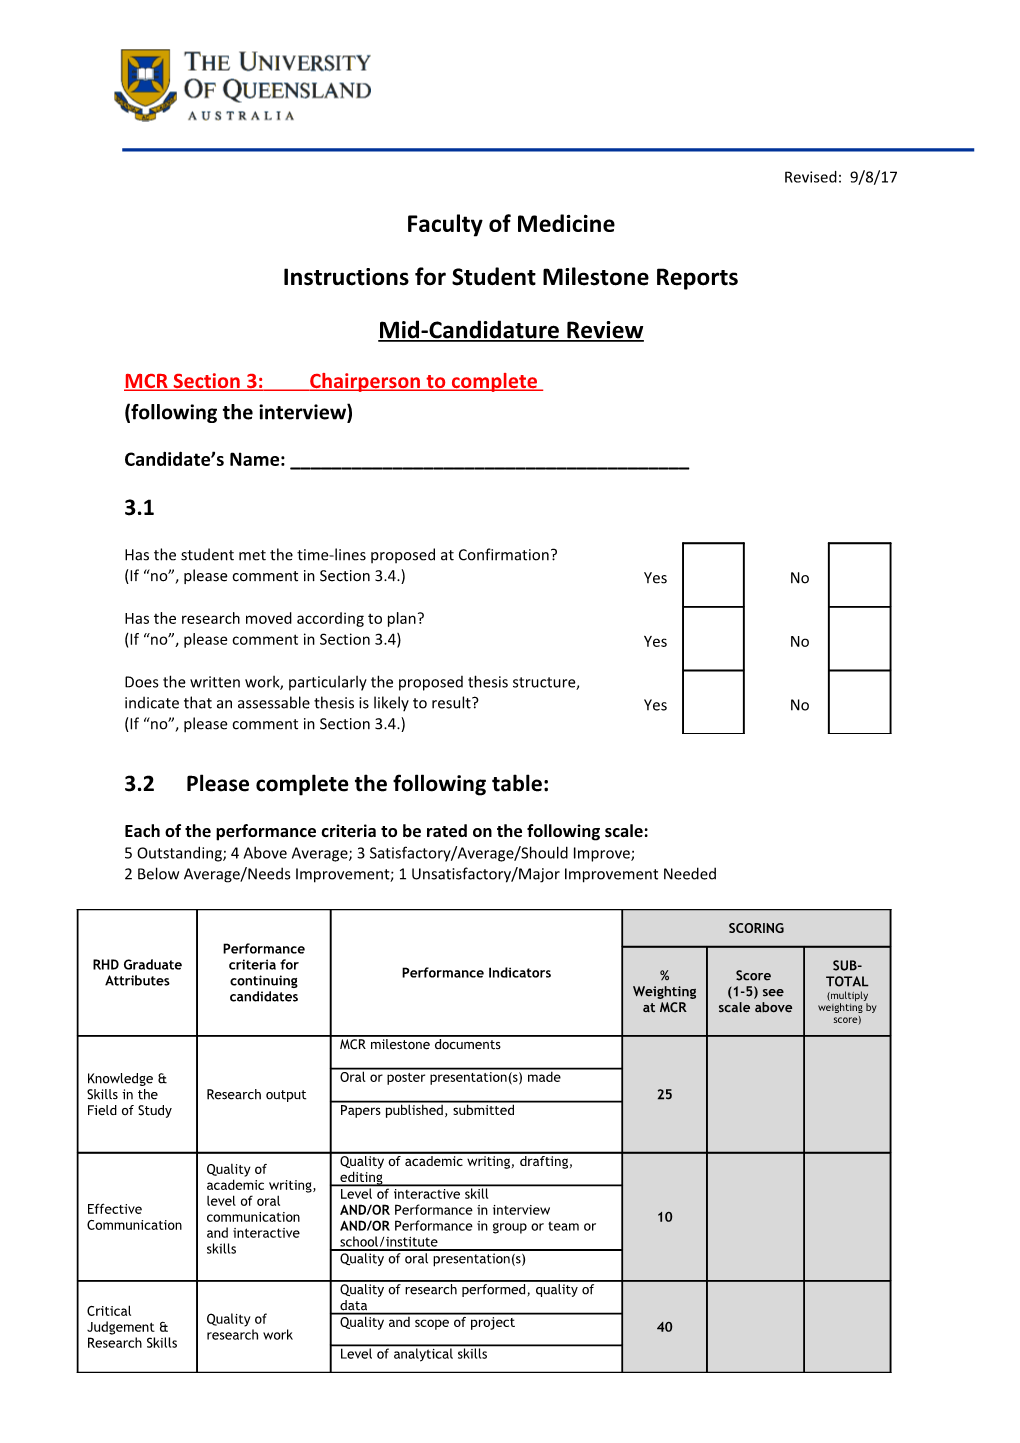 Instructions for Student Milestone Reports